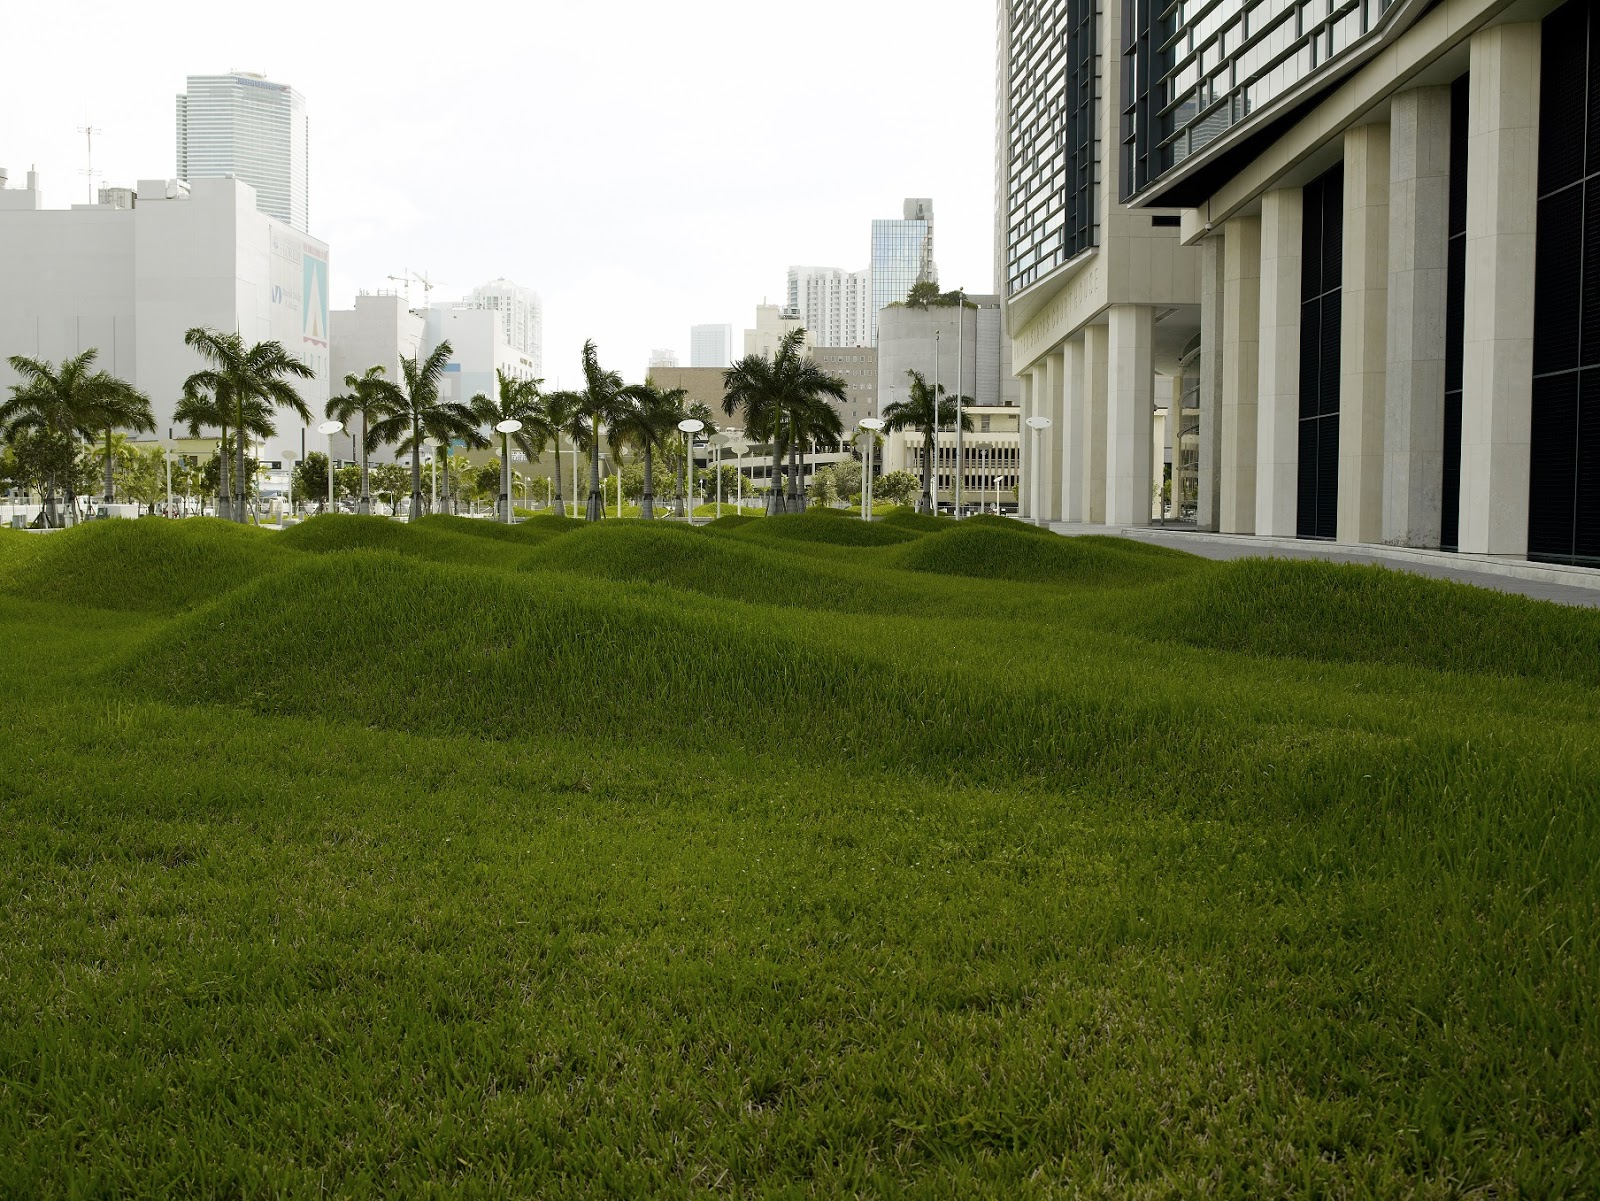 A landscape view of Flutter, by Maya Lin, that consists of a pair of sculpted lawns that mimic rippling water or sand.